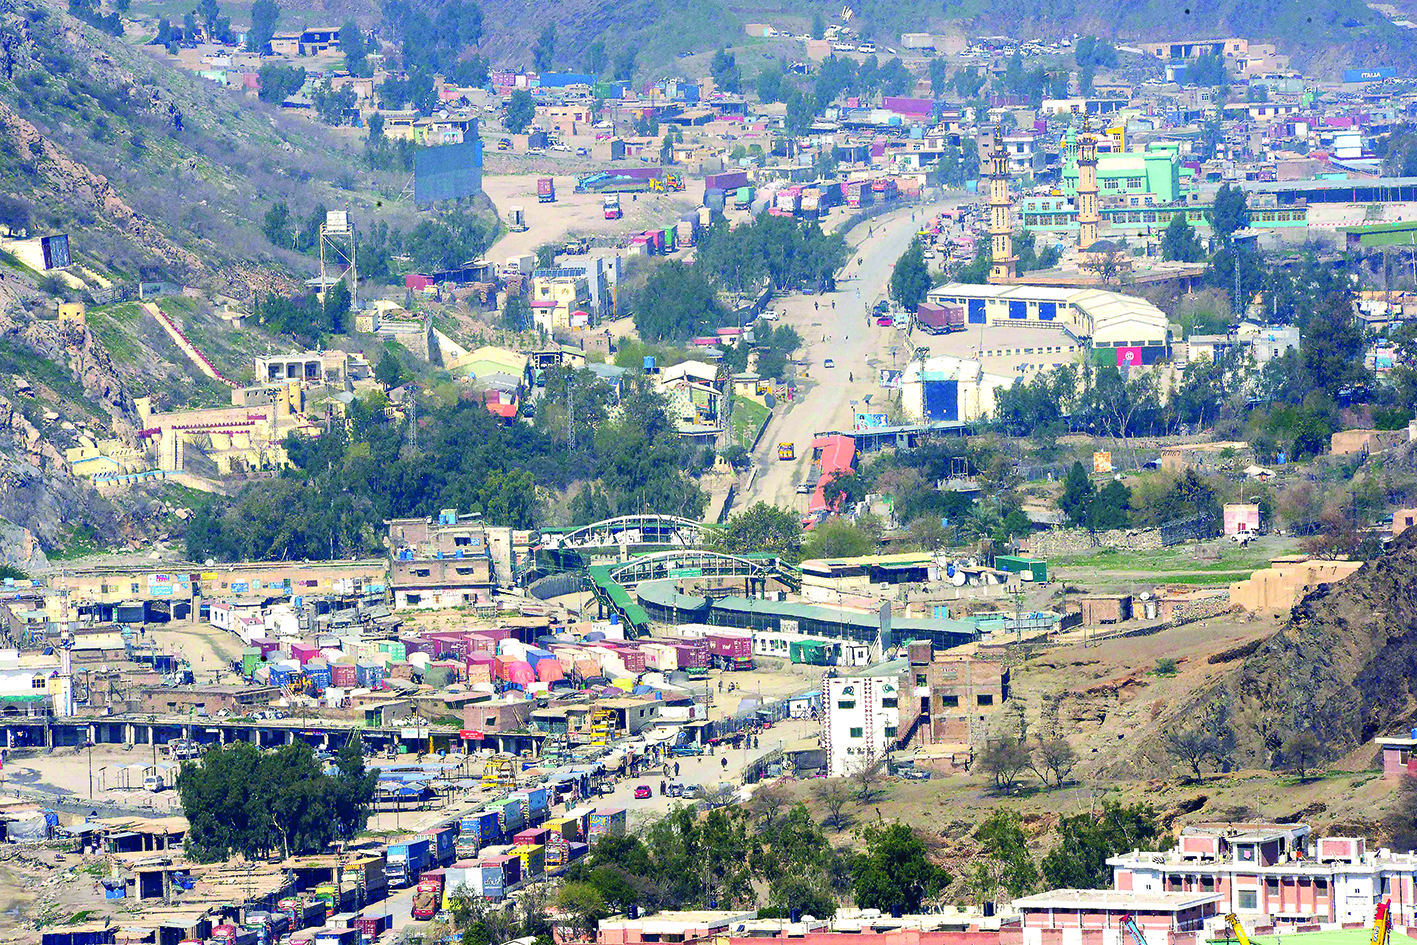 Afhan trucks line up as they wait to cross the Pakistan-Afghanistan closed amid concerns over the spread of the COVID-19 novel coronavirus, in Torkham some 54 kms fron Peshawar on March 16, 2020. - Pakistan will close its border with Iran and Afghanistan in a bid to control the spread of the coronavirus, the interior ministry said. The move is the latest such action as countries around the world act swiftly to restrict travel in an attempt to slow the global outbreak, which was this week declared a pandemic. (Photo by Abdul MAJEED / AFP)